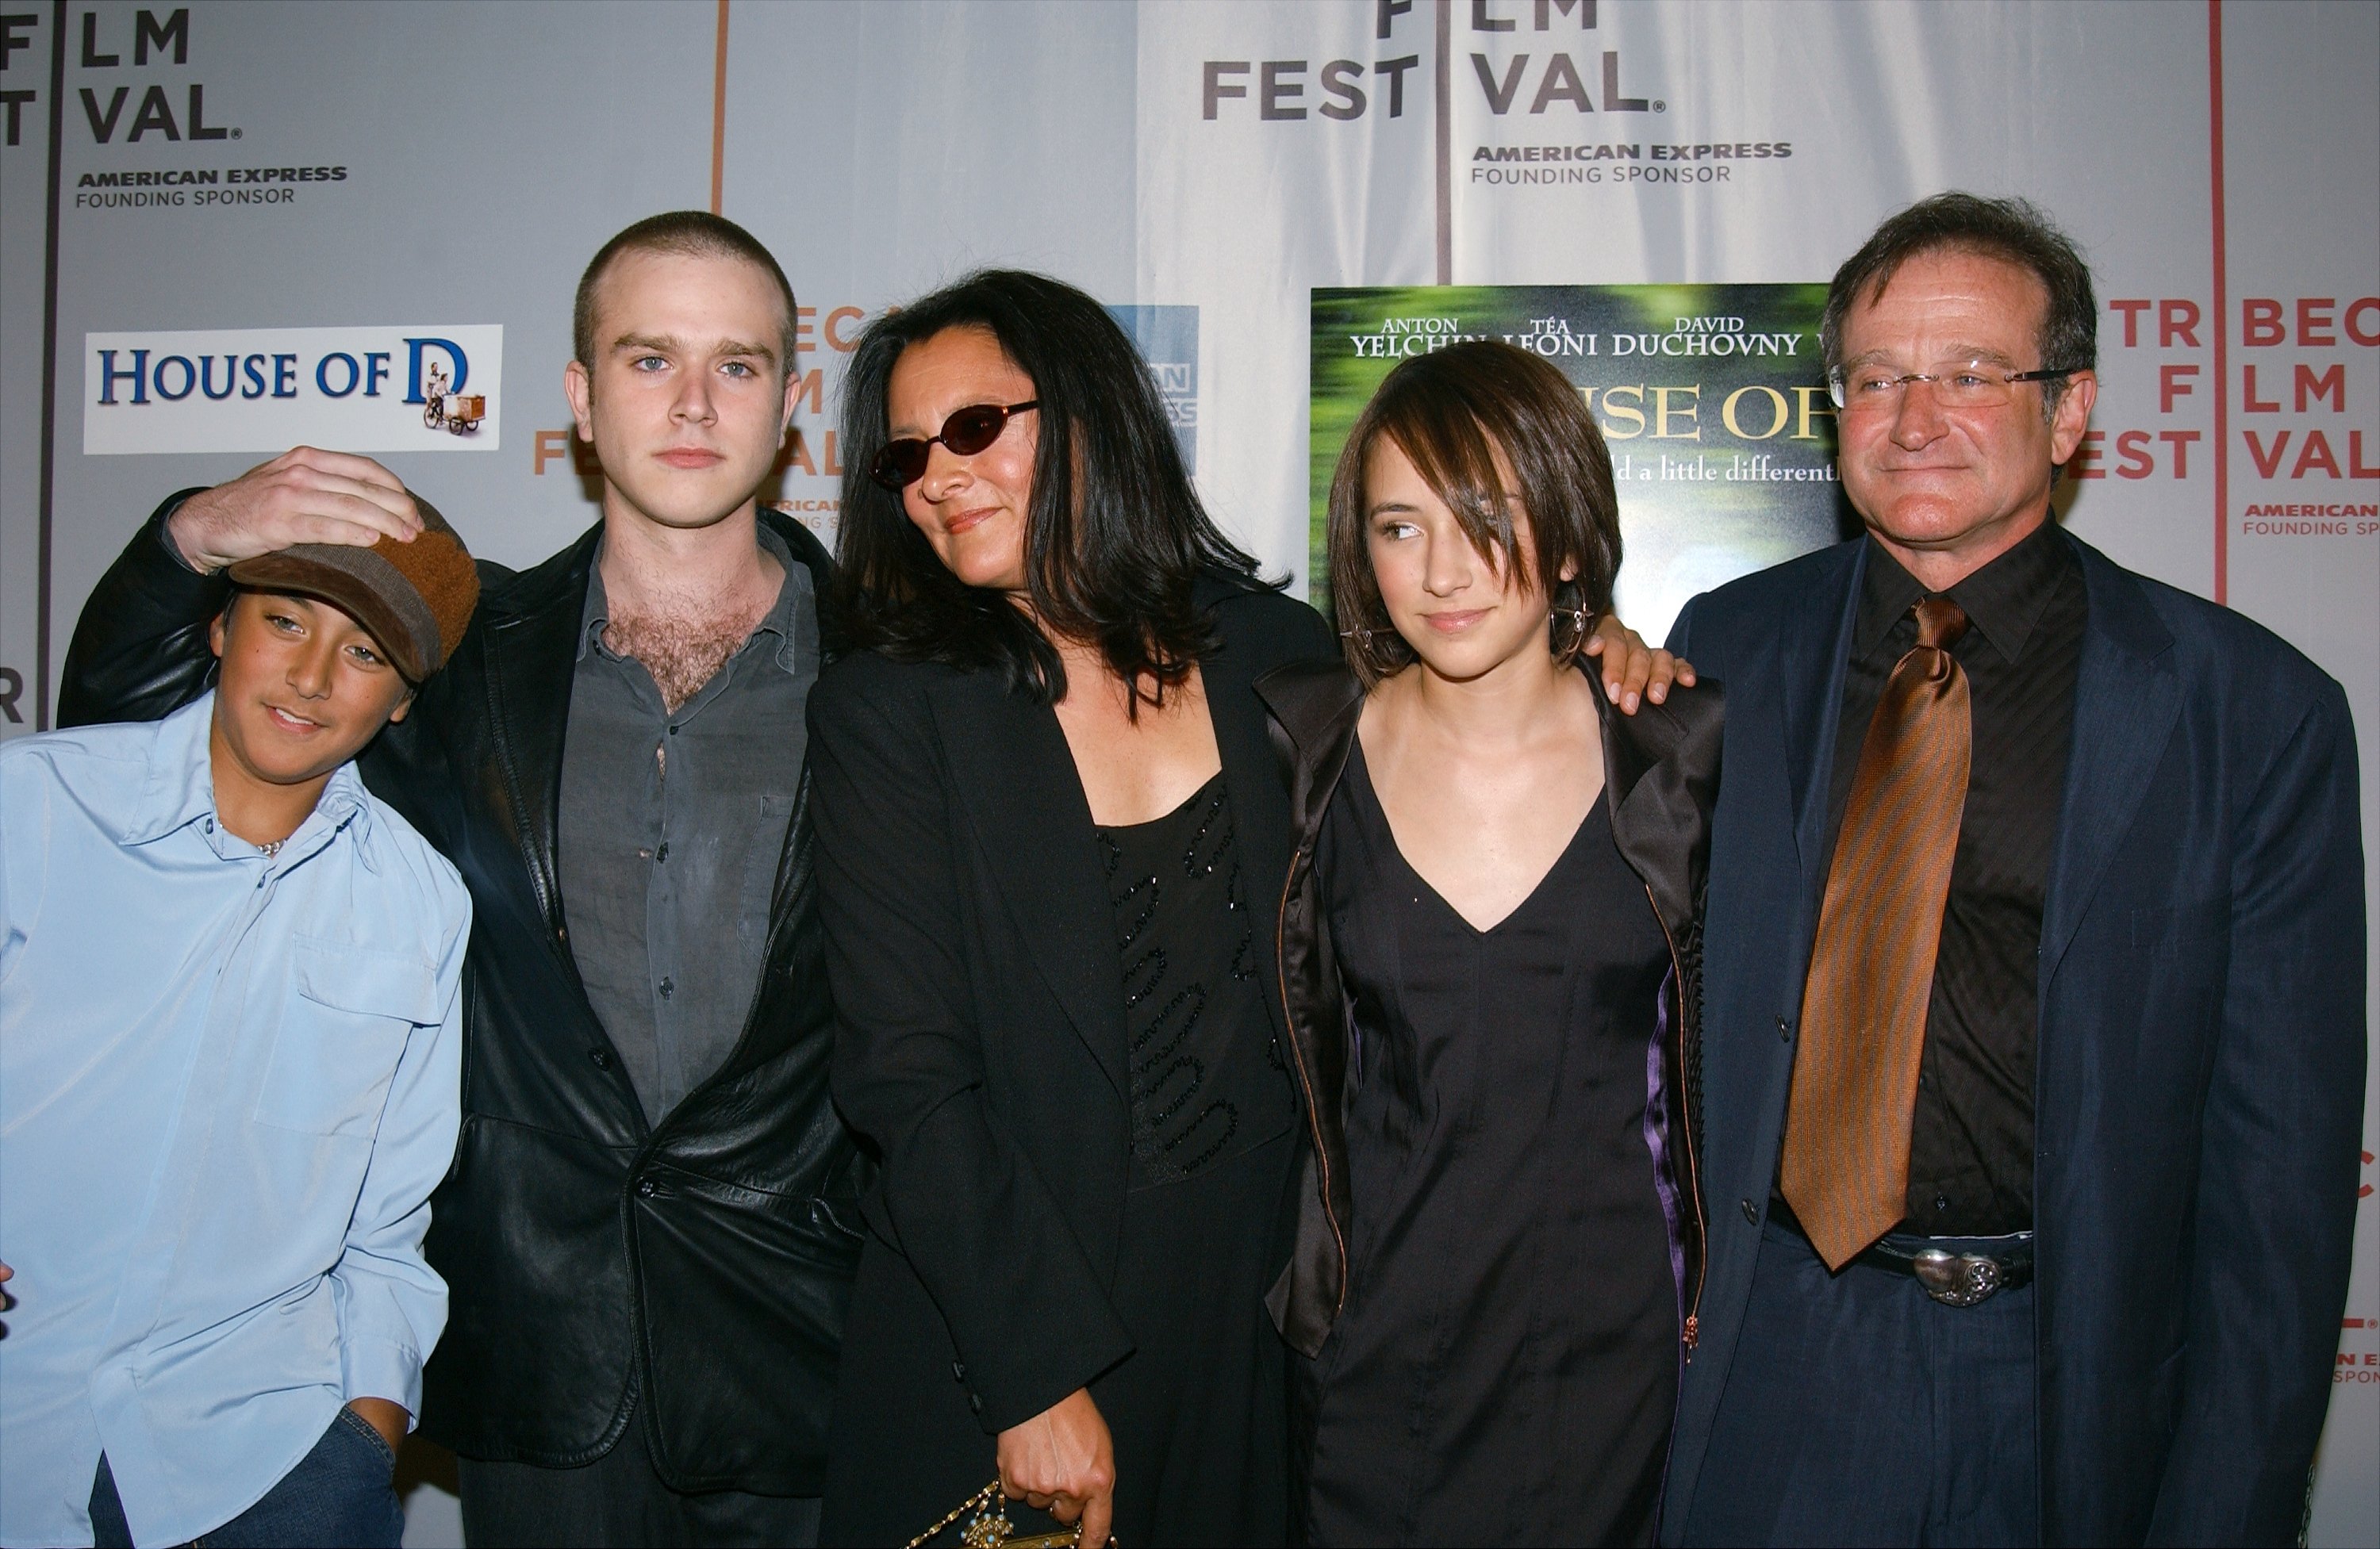 Robin Williams, ex-wife Marsha (third left), and children Cody, Zachary and Zelda (left to right) attend the Tribeca Film Festival screening of "House of D" at the Tribeca Performing Arts Center on May 7, 2004. | Source: Getty Images